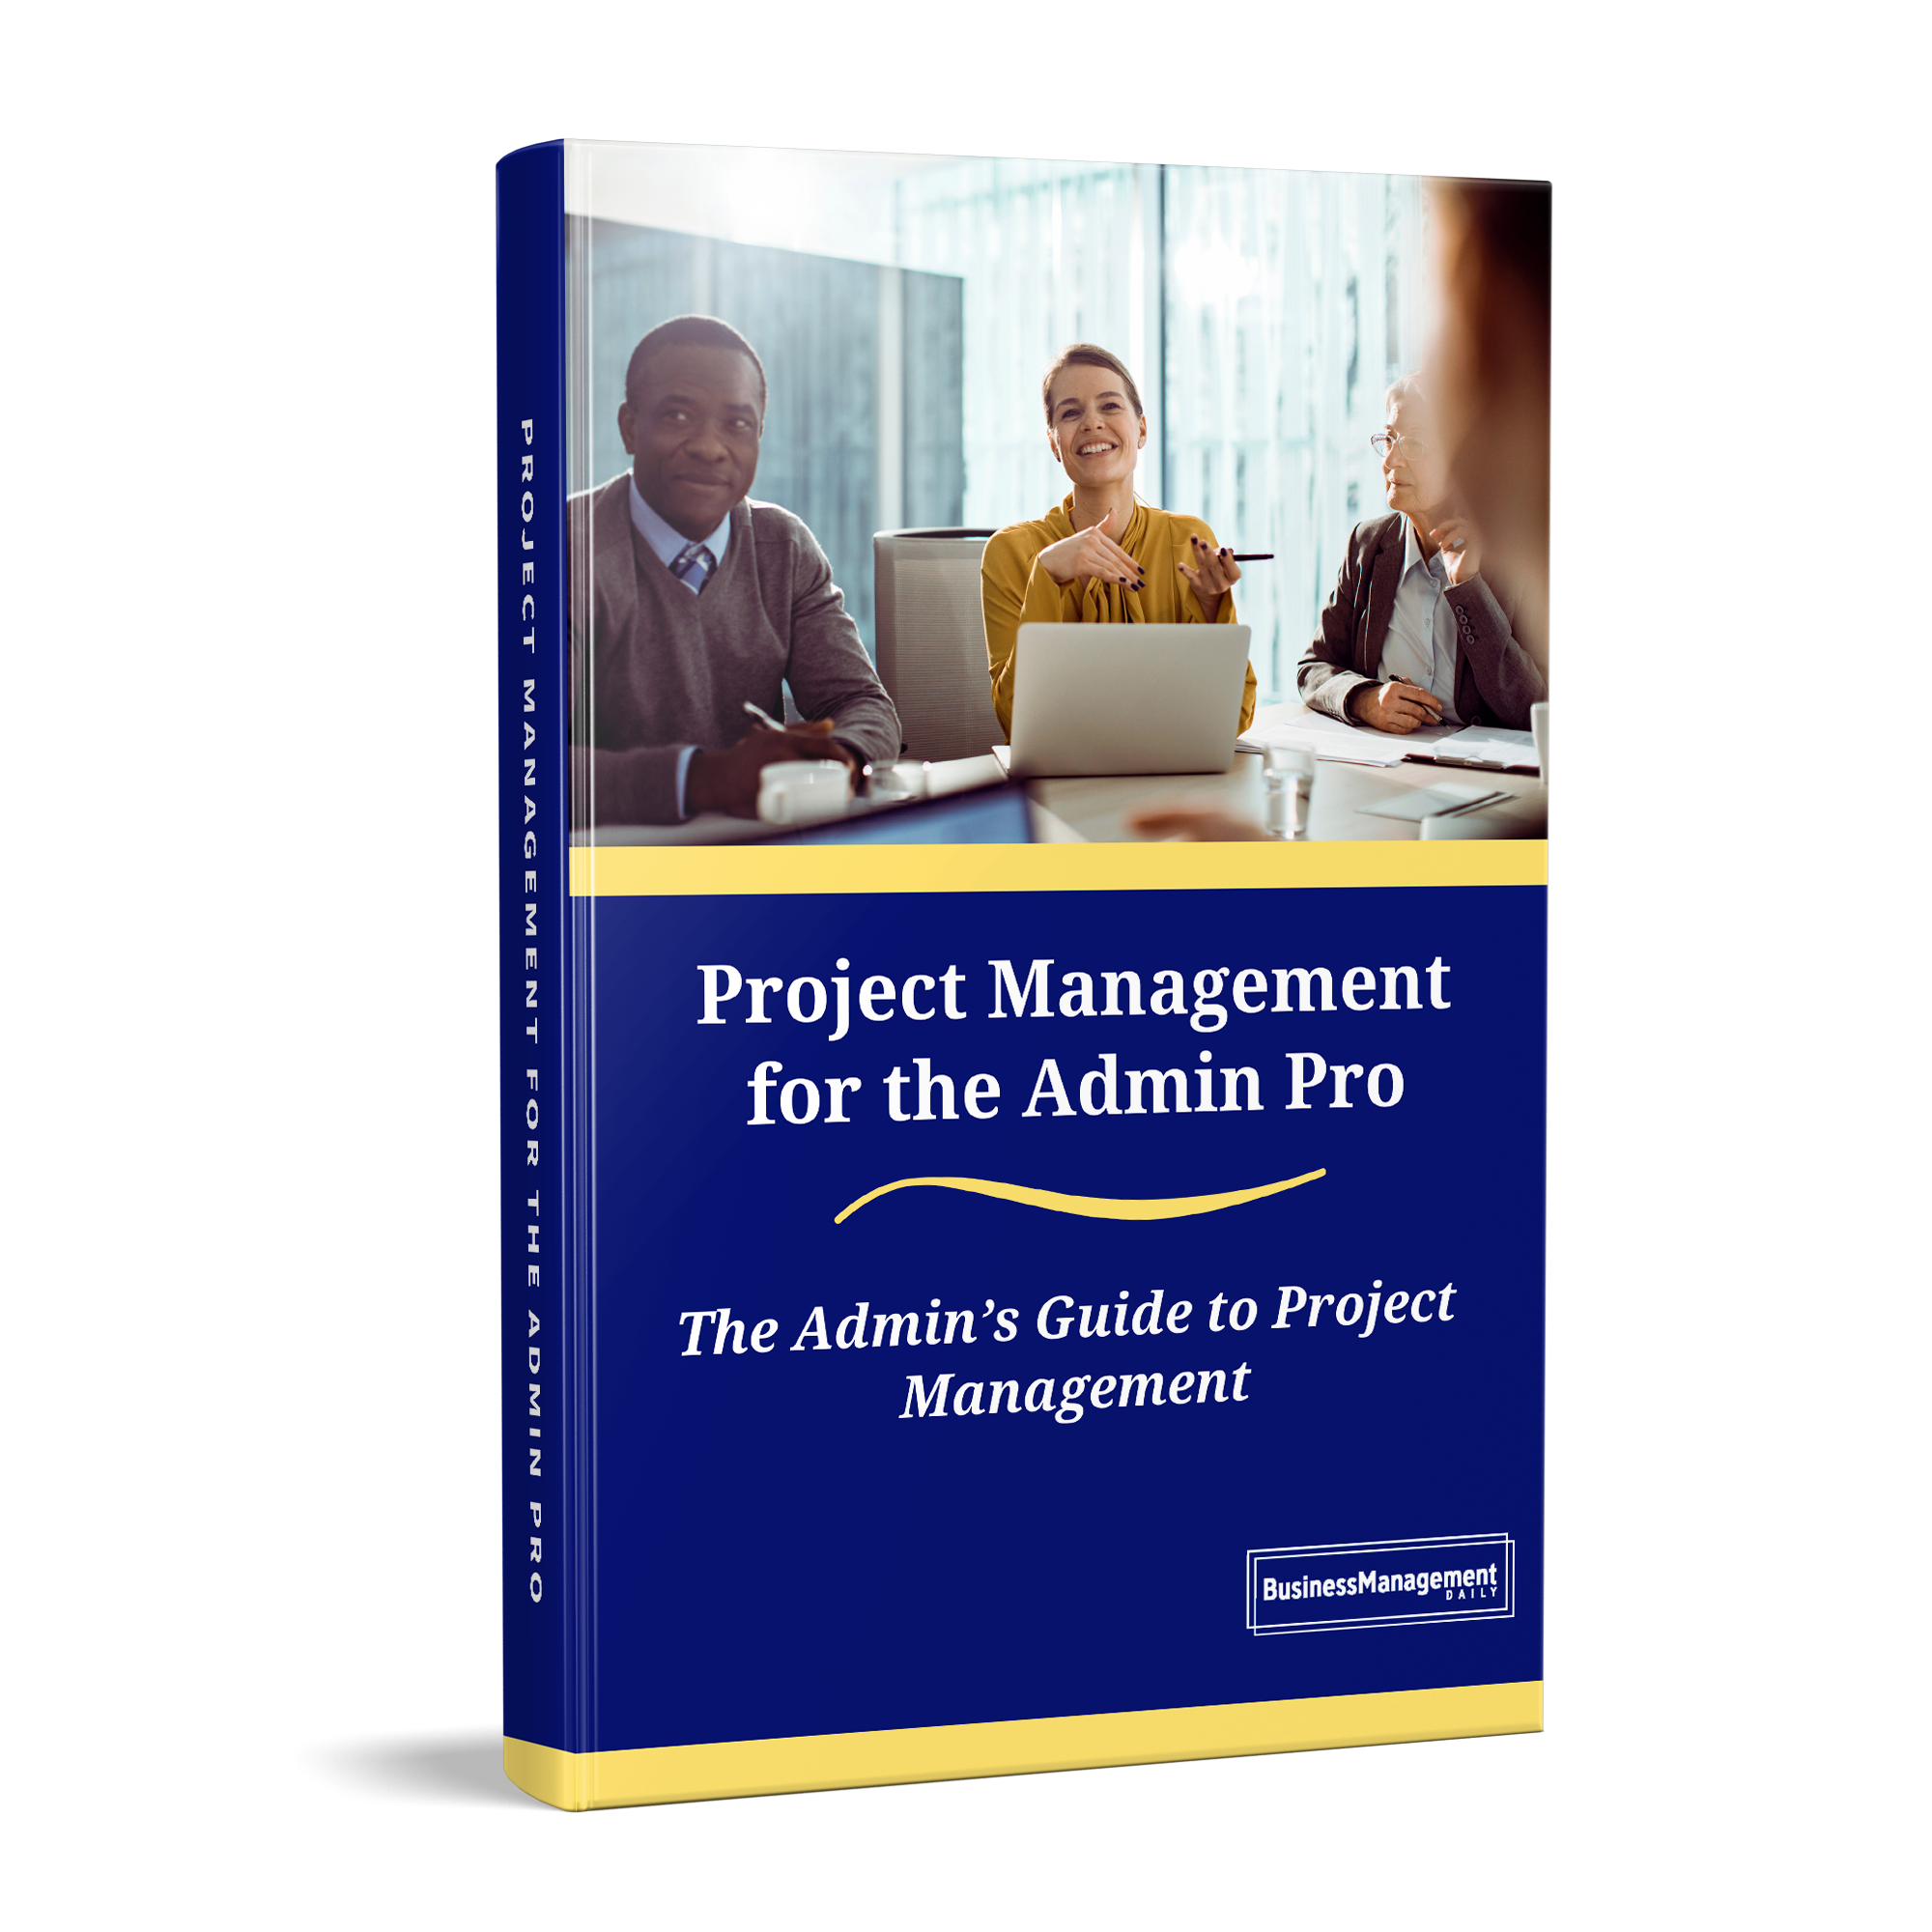 Project Management for the Admin Pro